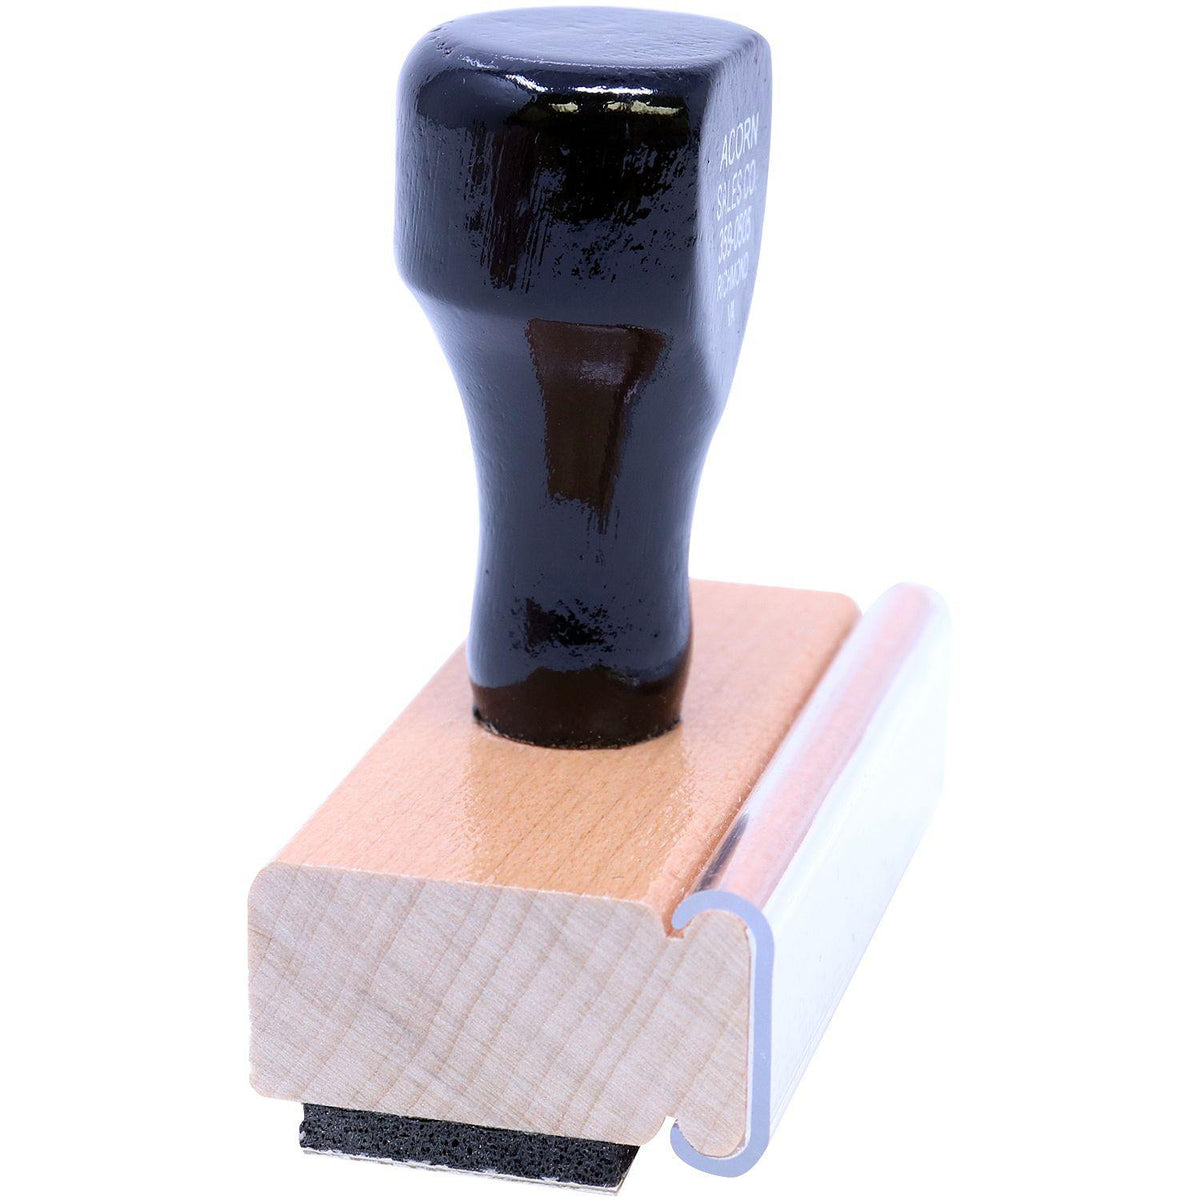 Please Sign Return Rubber Stamp - Engineer Seal Stamps - Brand_Acorn, Impression Size_Small, Stamp Type_Regular Stamp, Type of Use_Teacher